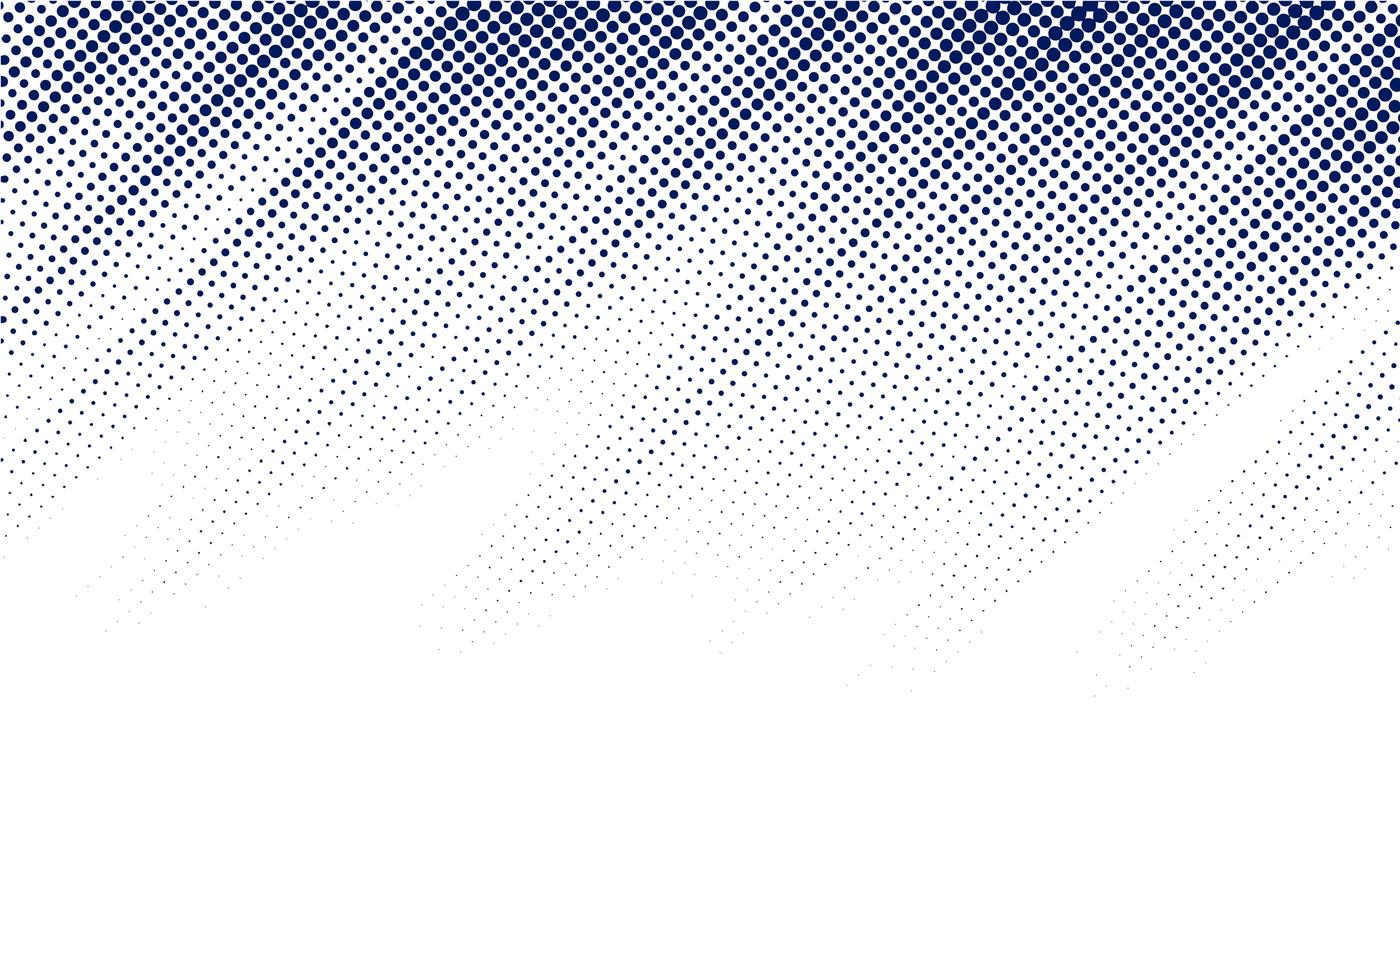 Abstract blue diagonal halftone texture on white background vector